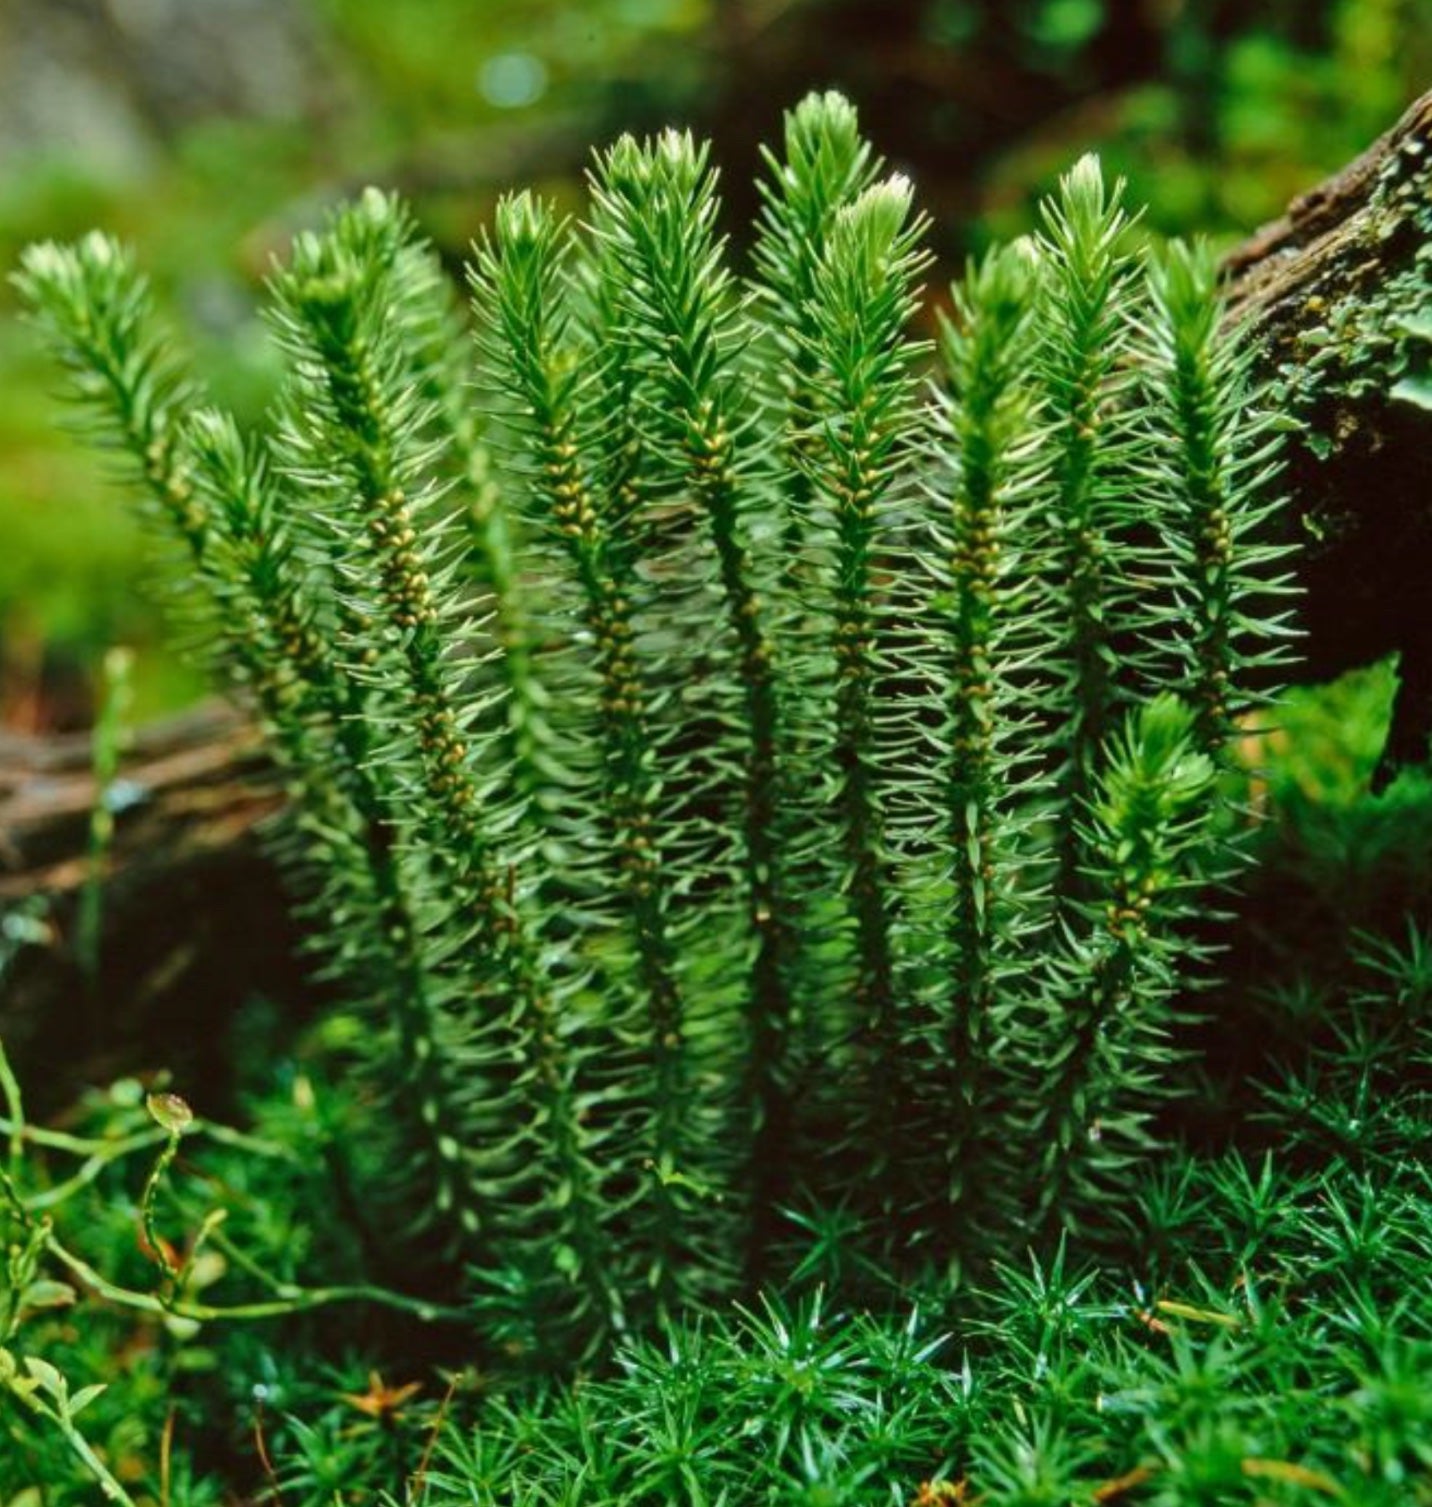 How a Chinese Club Moss Boosts Memory & Attention